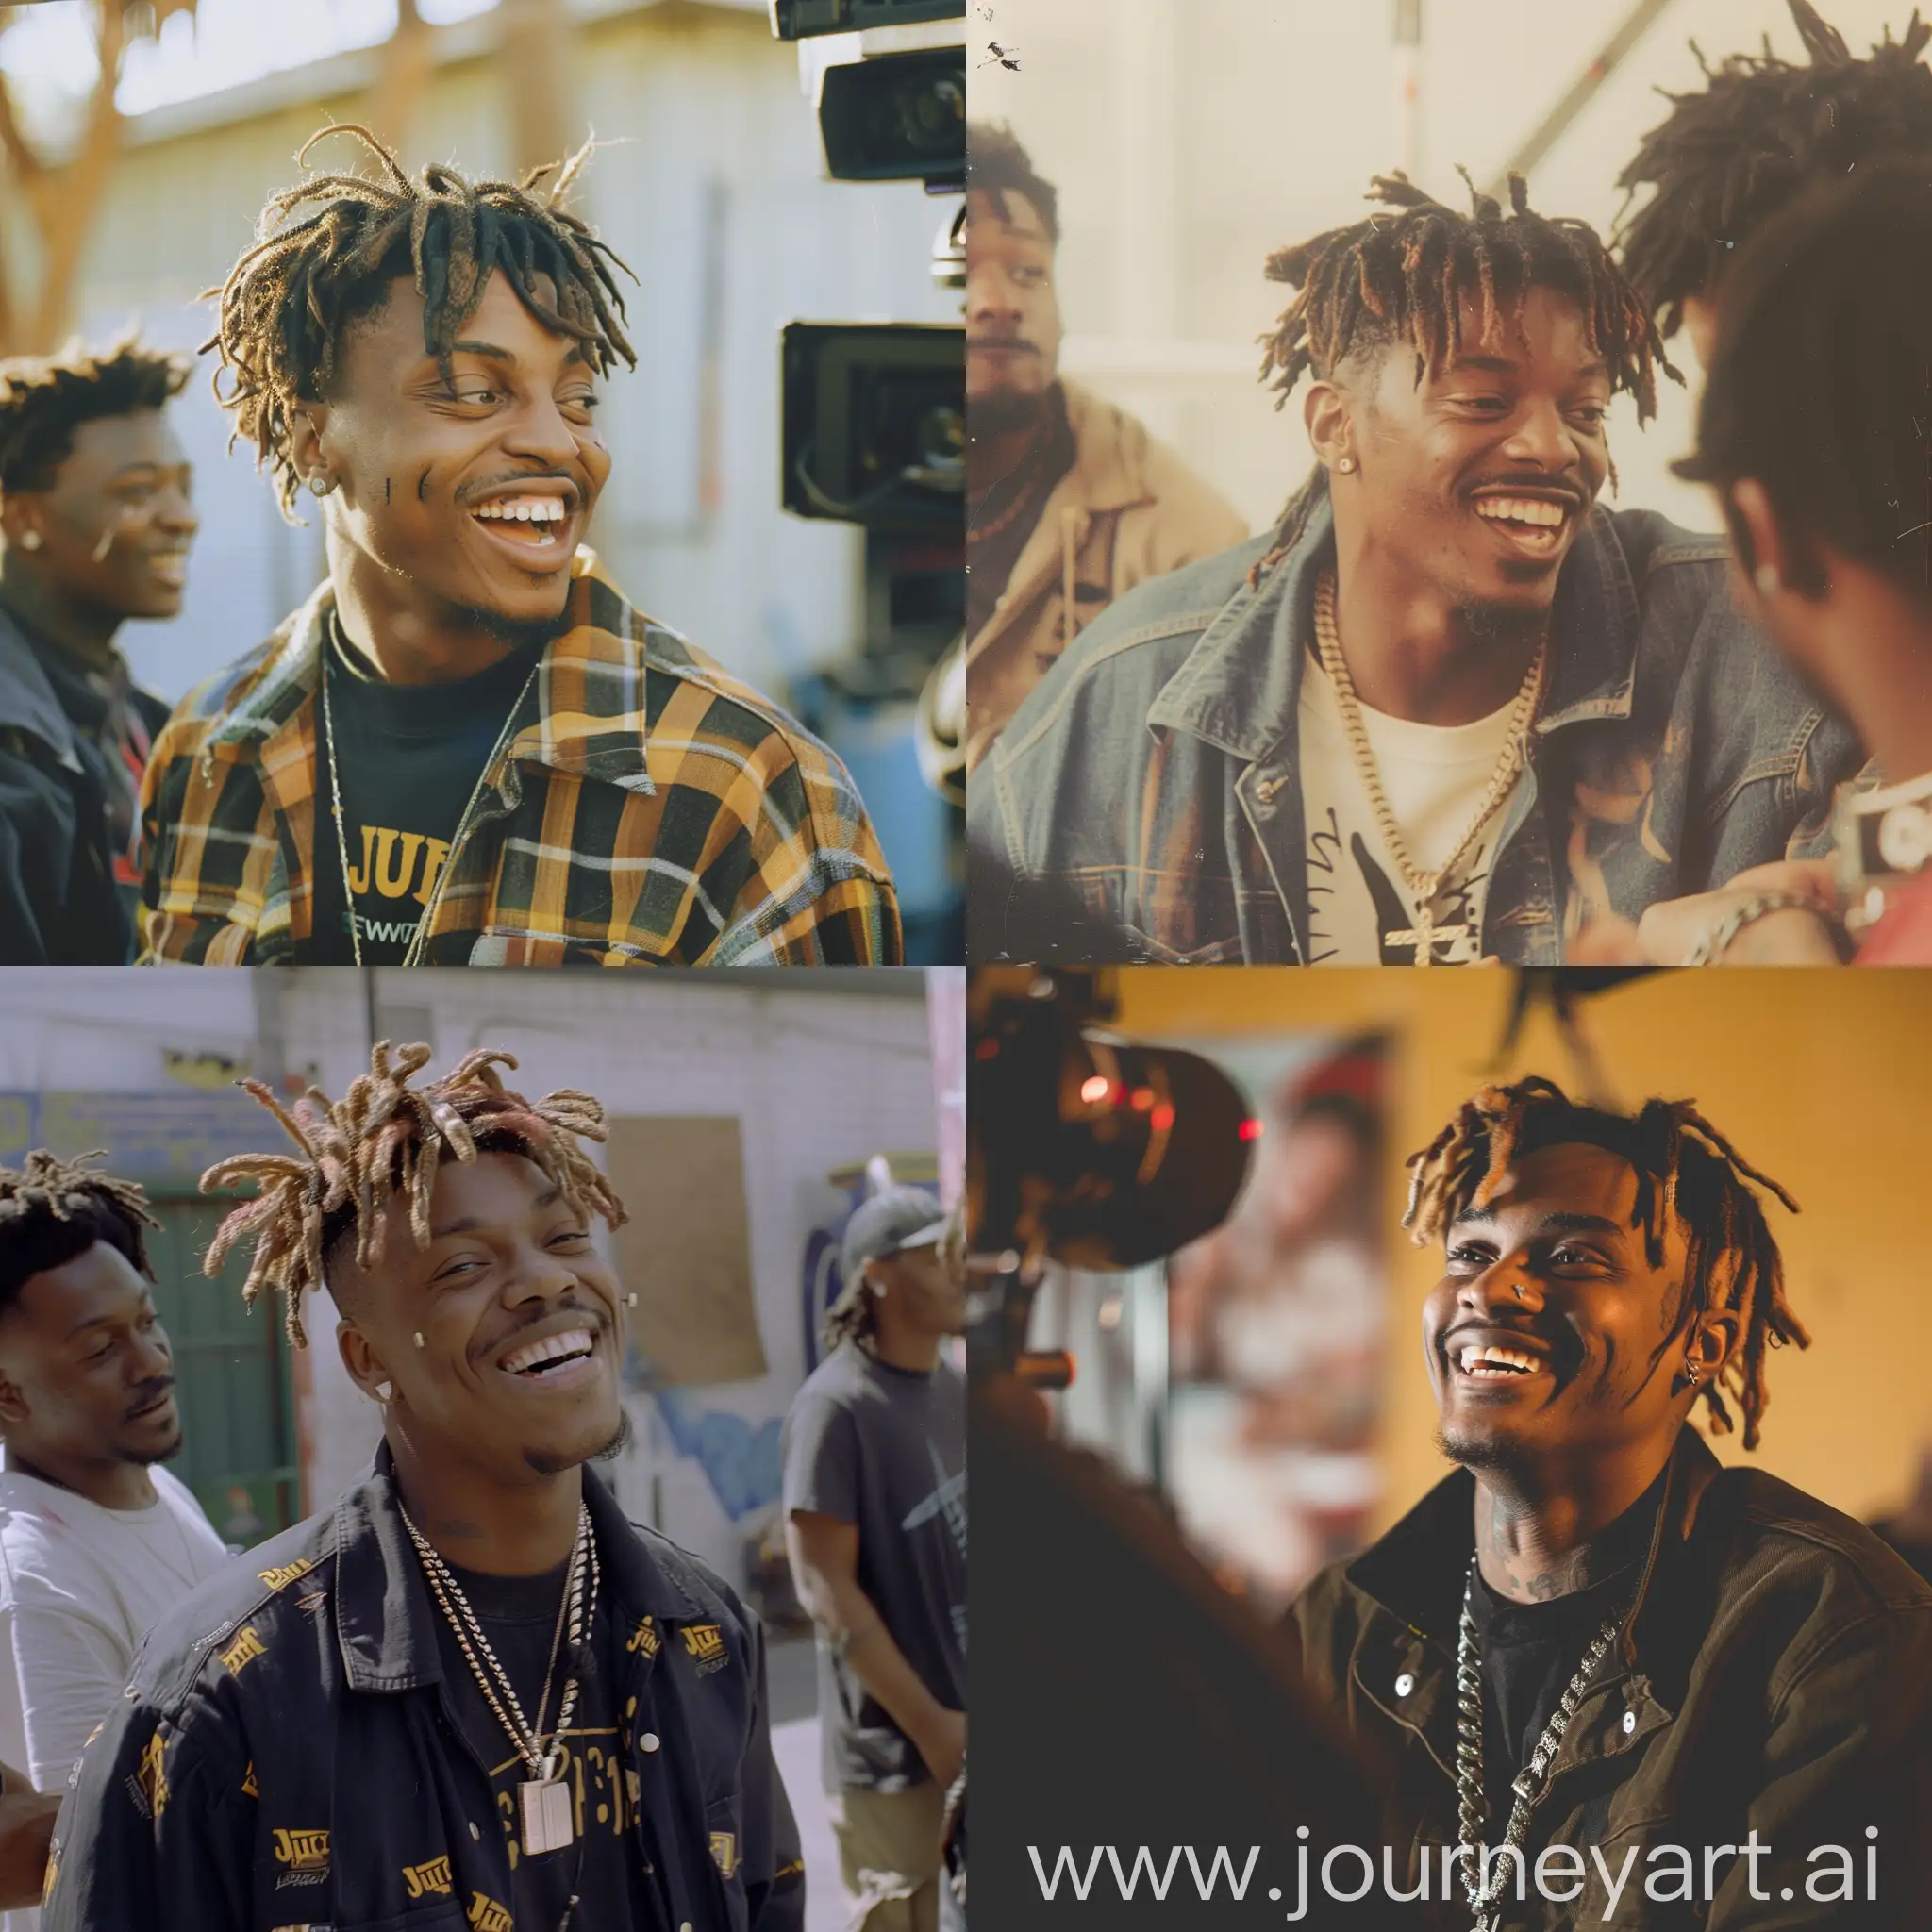 Juice-Wrld-Laughing-Behind-the-Scenes-Candid-Moment-from-1990s-Movie-Set